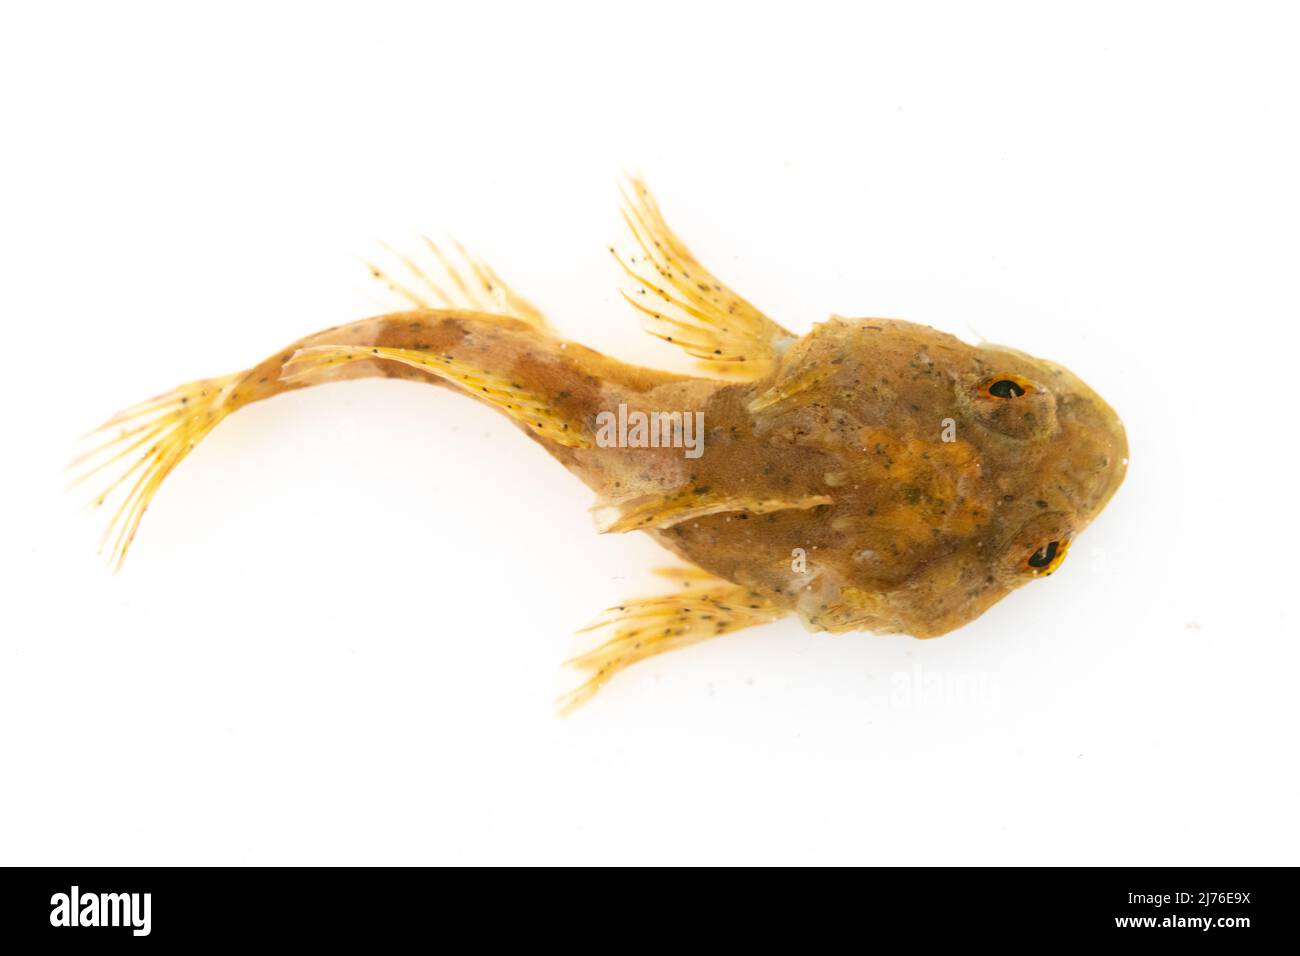 short spined scorpion fish on white back drop Stock Photo